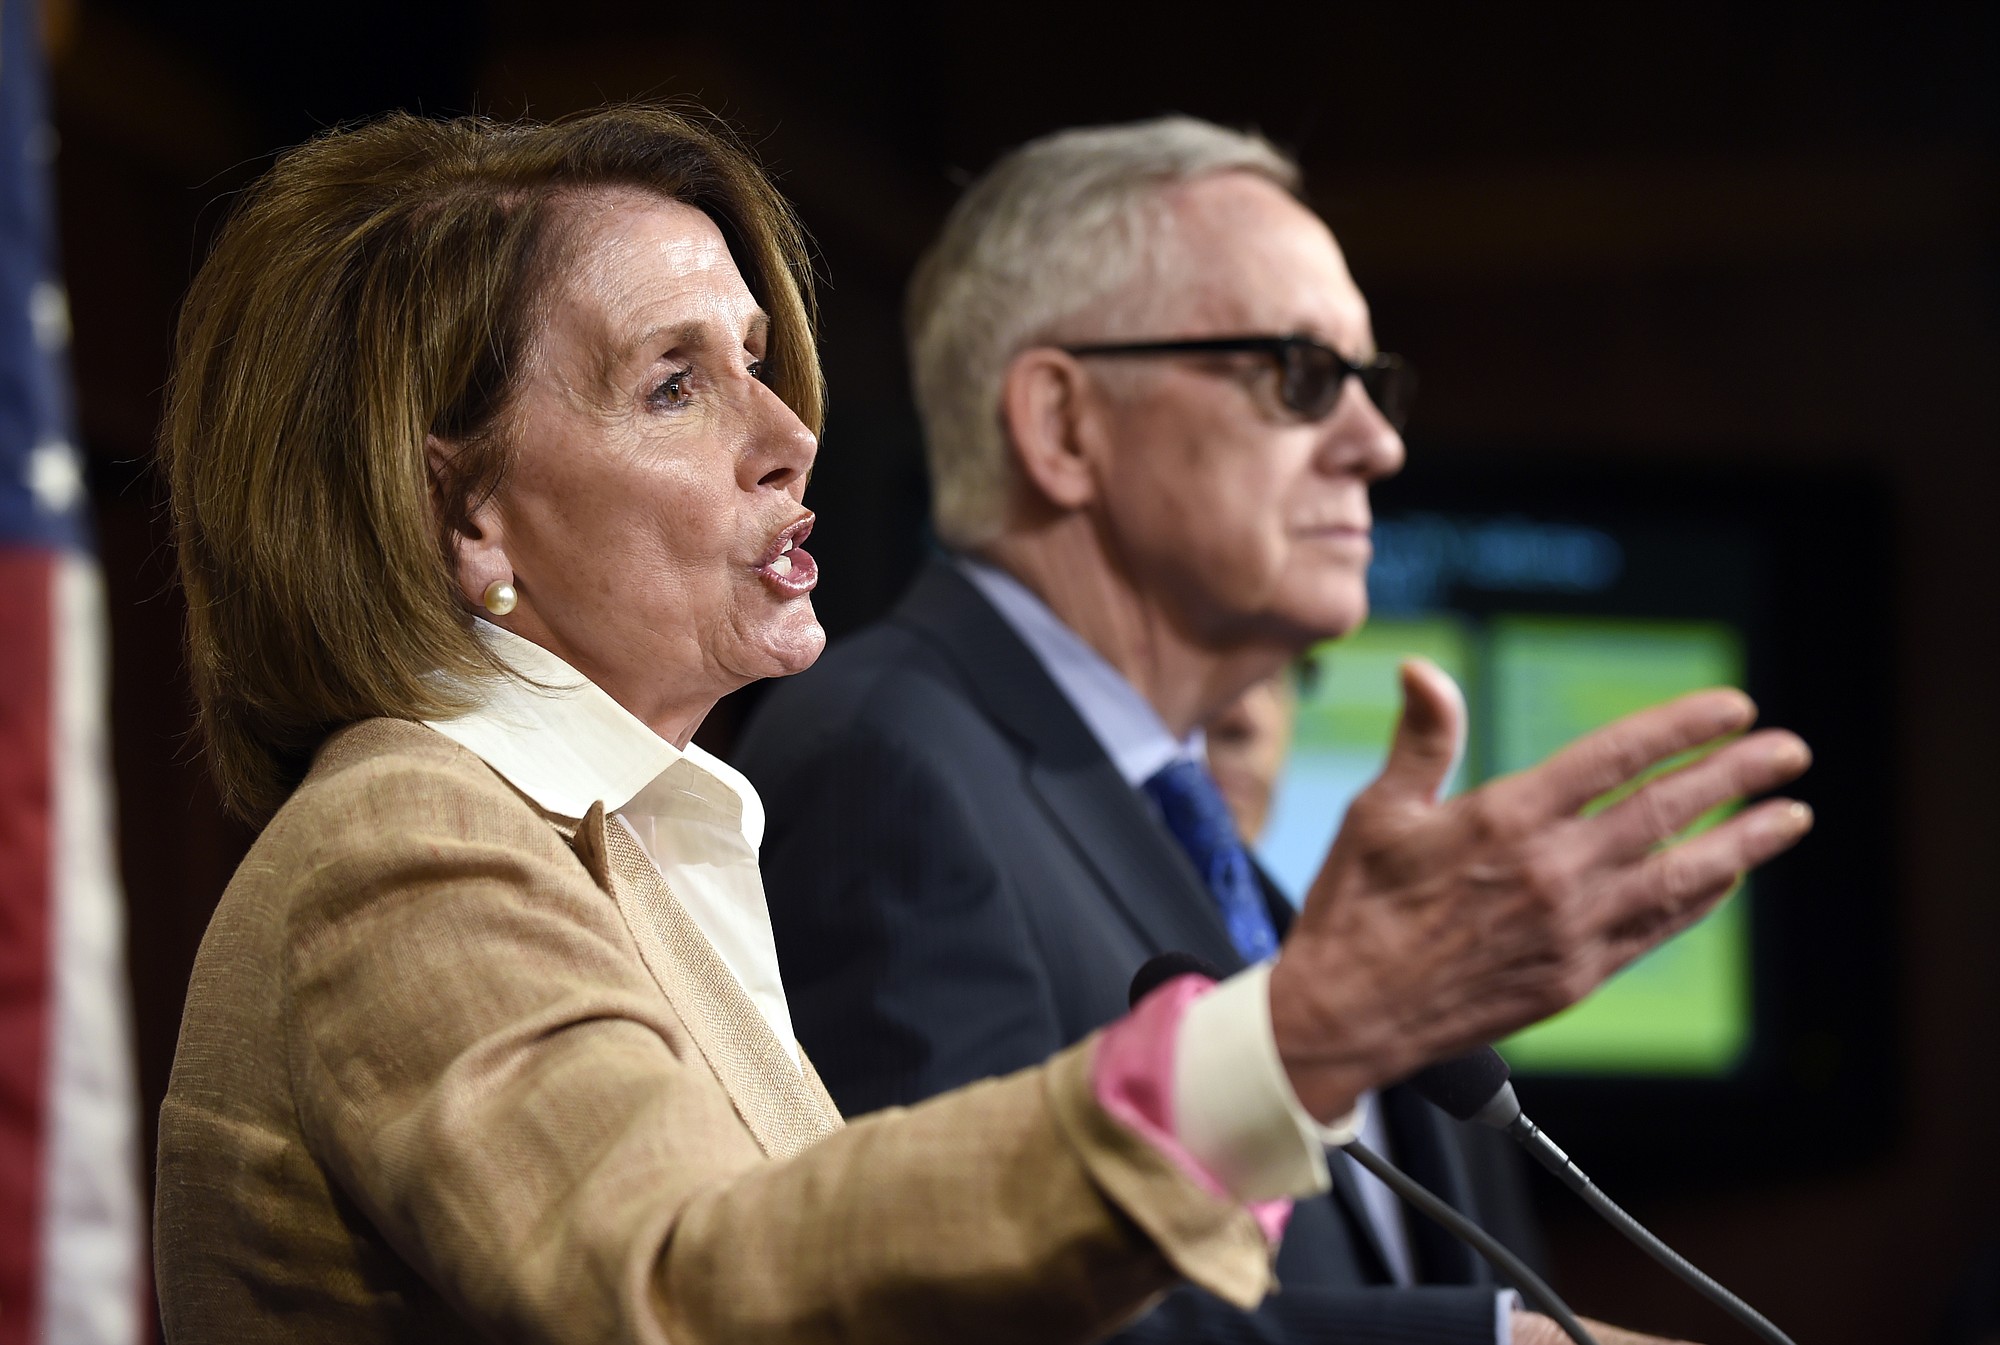 House Minority Leader Nancy Pelosi of Calif., left, accompanied by Senate Minority Leader Harry Reid of Nev. speaks during a news conference June 25 on Capitol Hill in Washington.